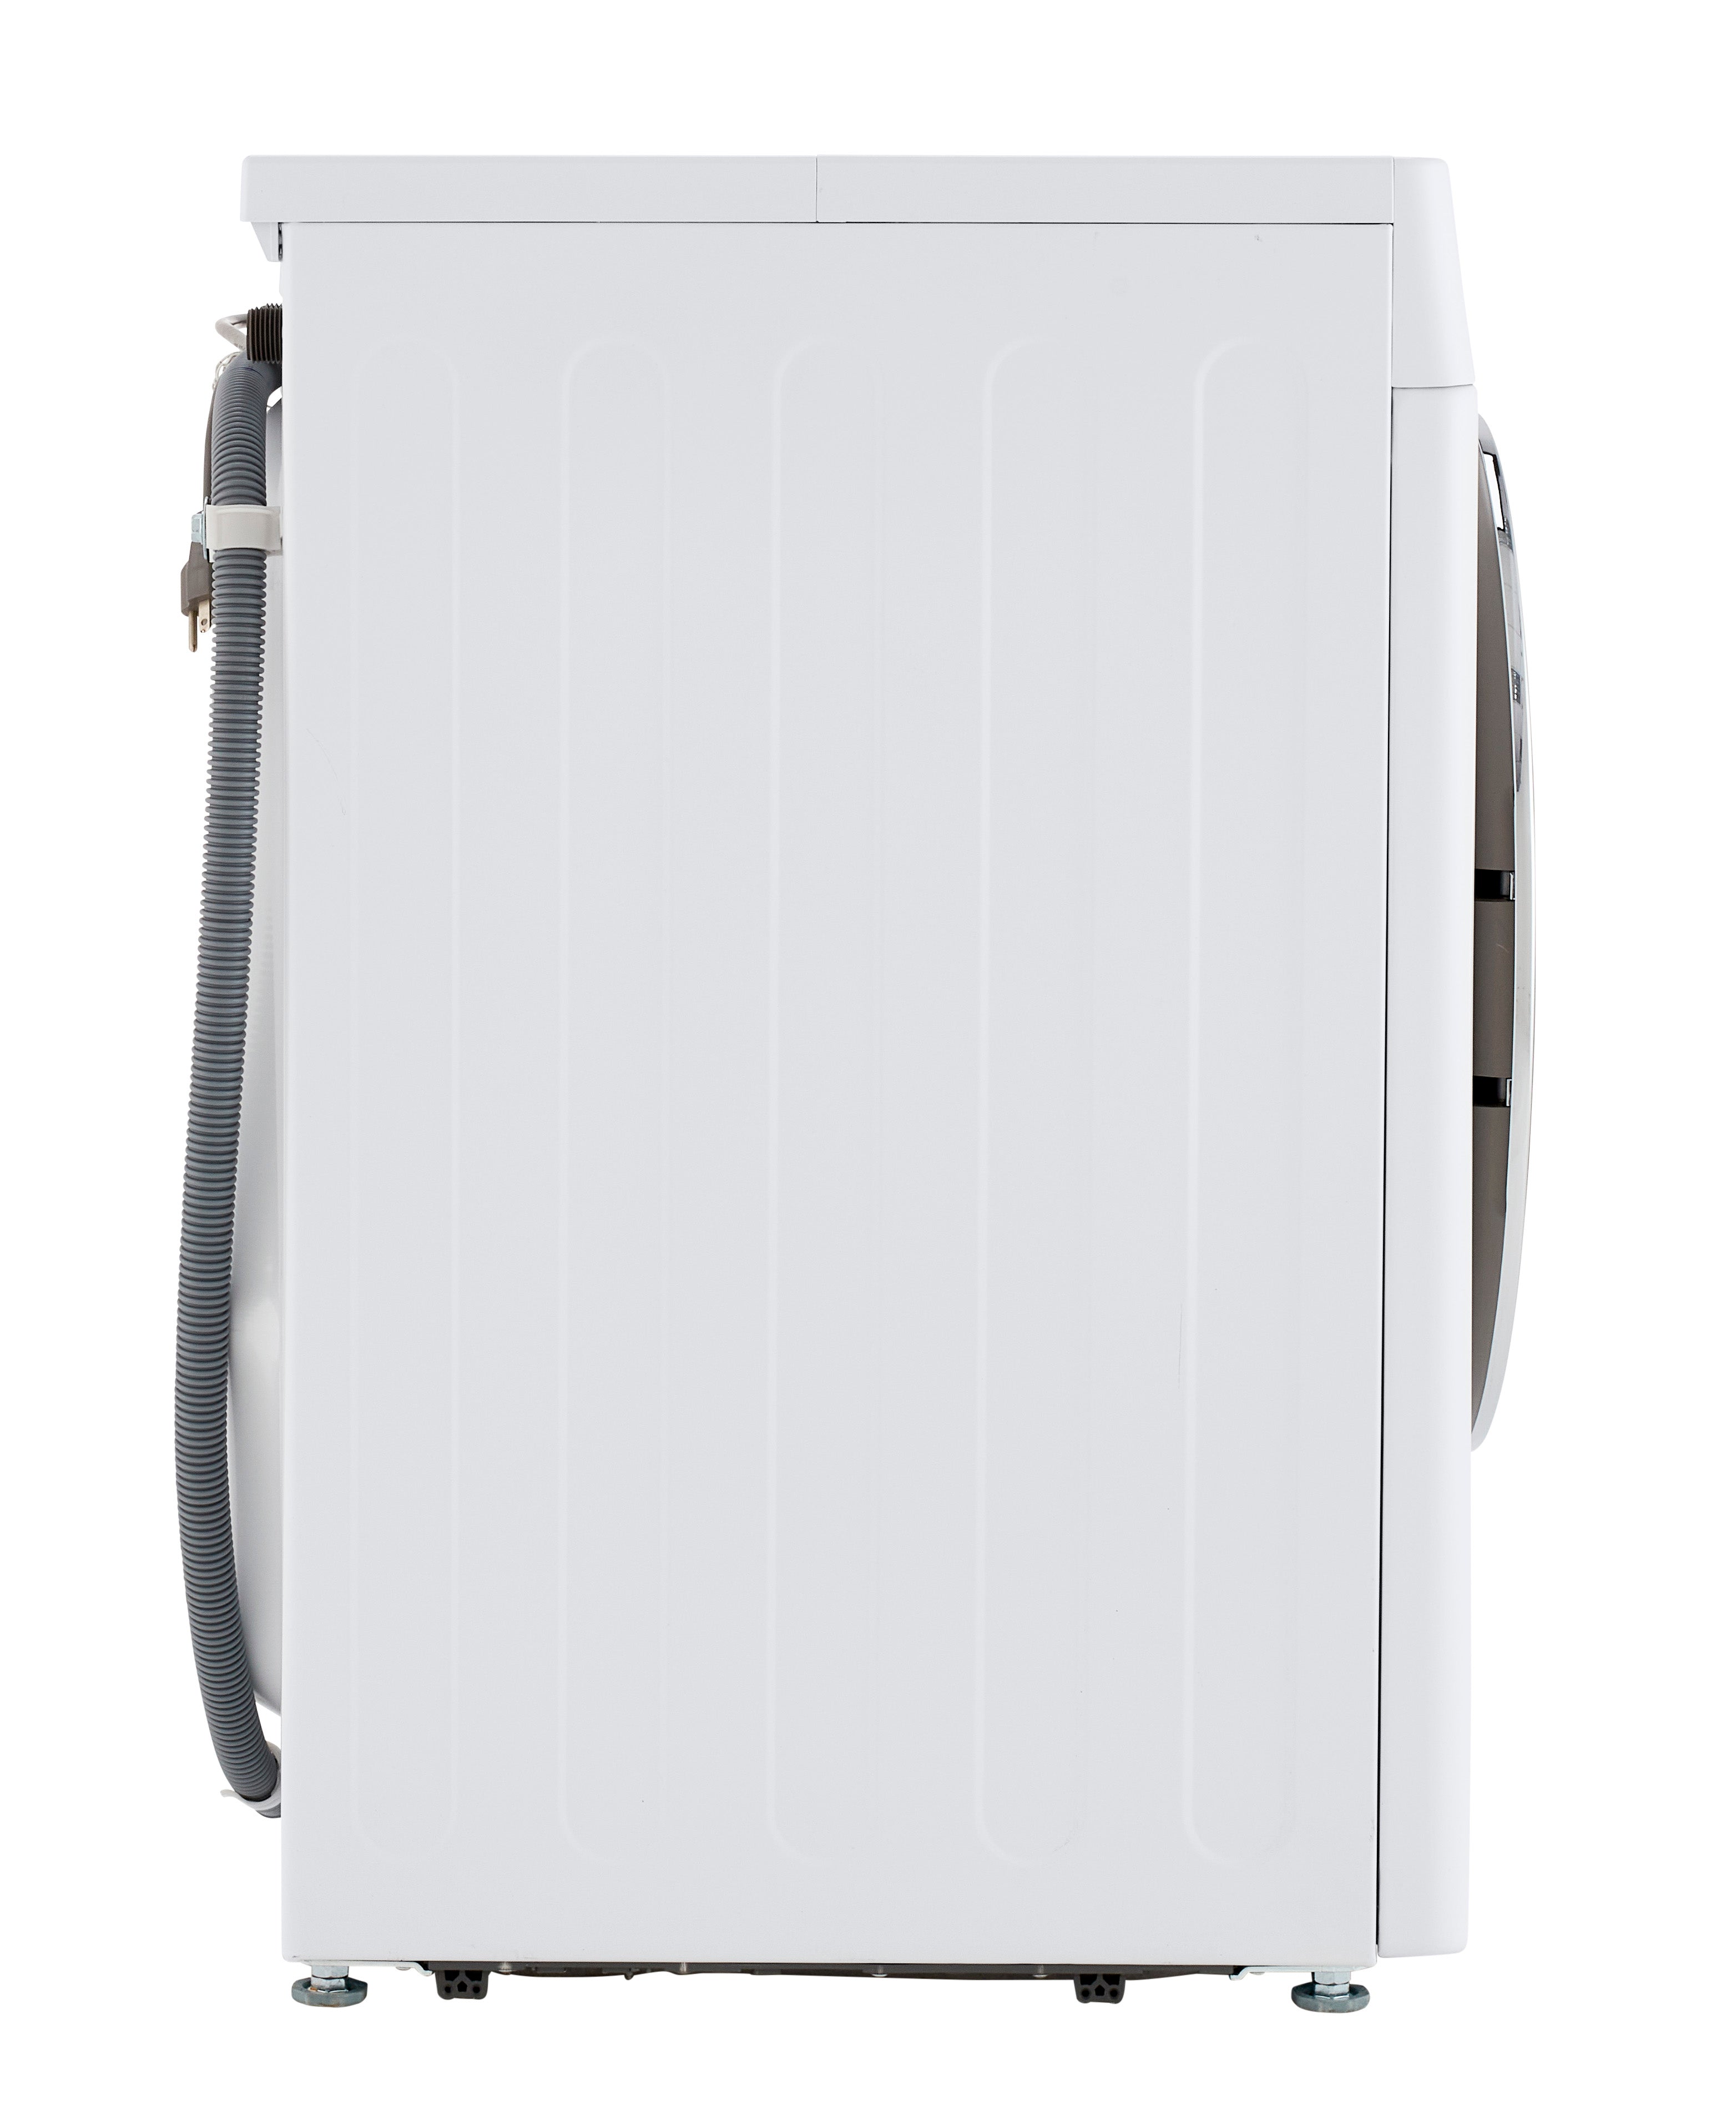 LG - 2.4 cu. Ft  Compact Washer in White - WM1455HWA